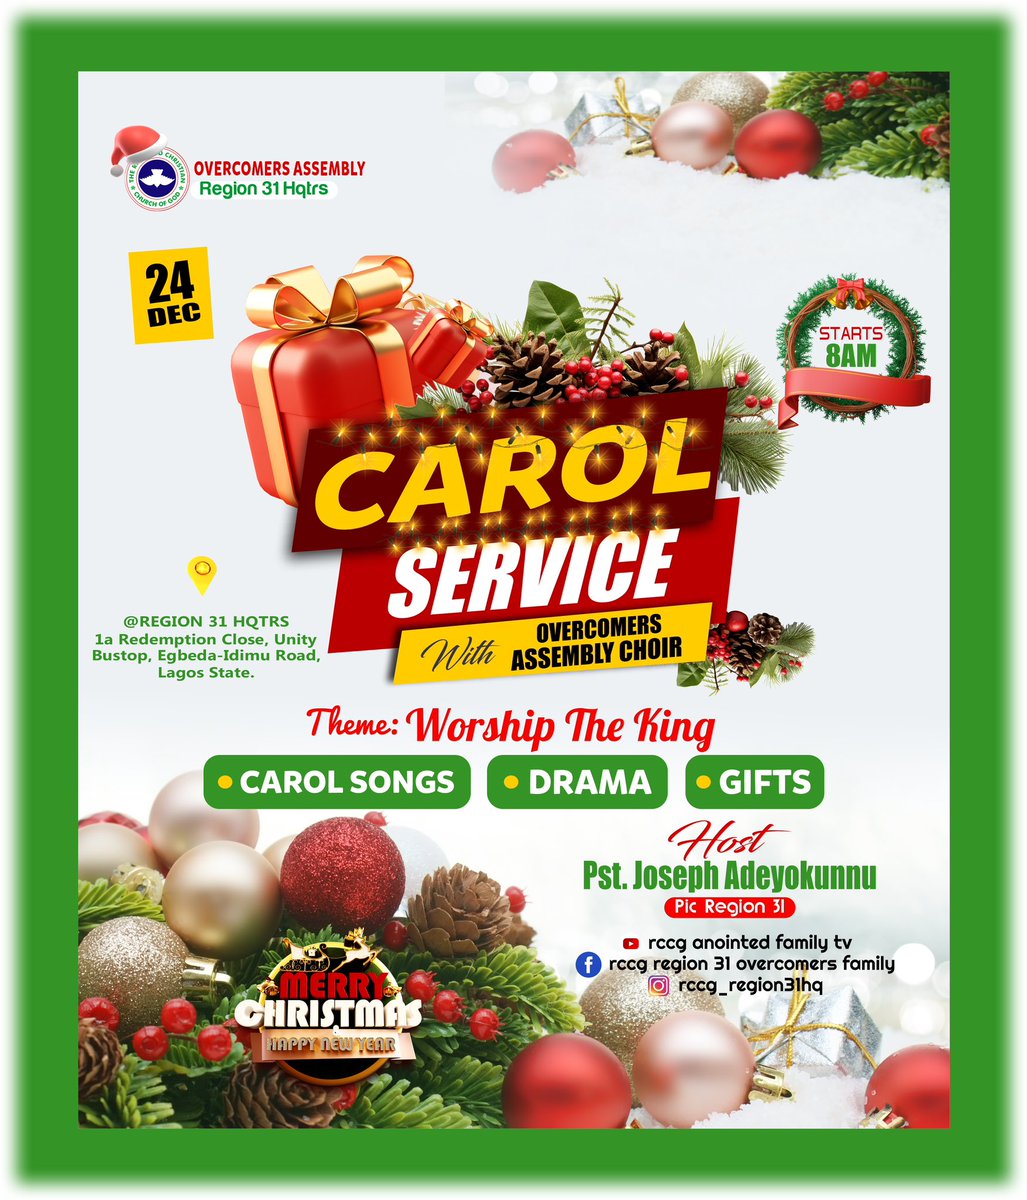 Embrace the echoes of joy, the harmony of blessings, notes of praise, and hymns of peace at @rccgregion31hq Church Carol Service. 

It’s a perfect balance of Christmas spirit.

This Sunday, Come, join us, and be part of the melody that warms the soul. 🎄🎵

#pkr
#christmascarols